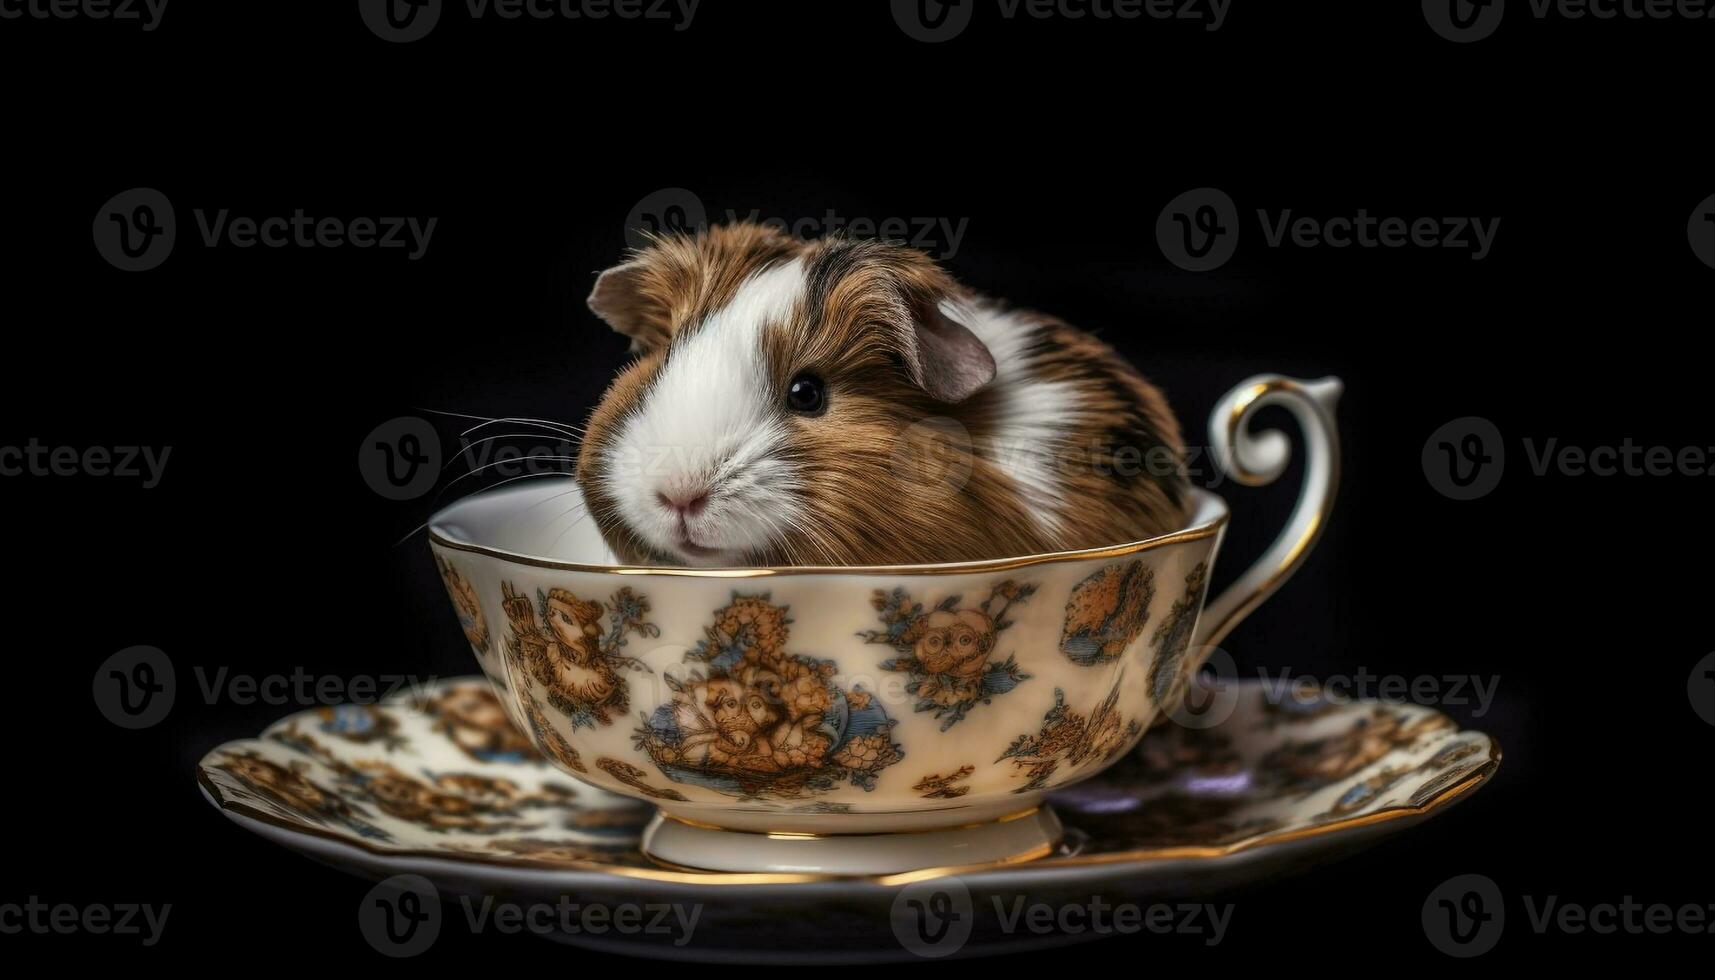 Cute fluffy guinea pig eating from small bowl on saucer generated by AI photo